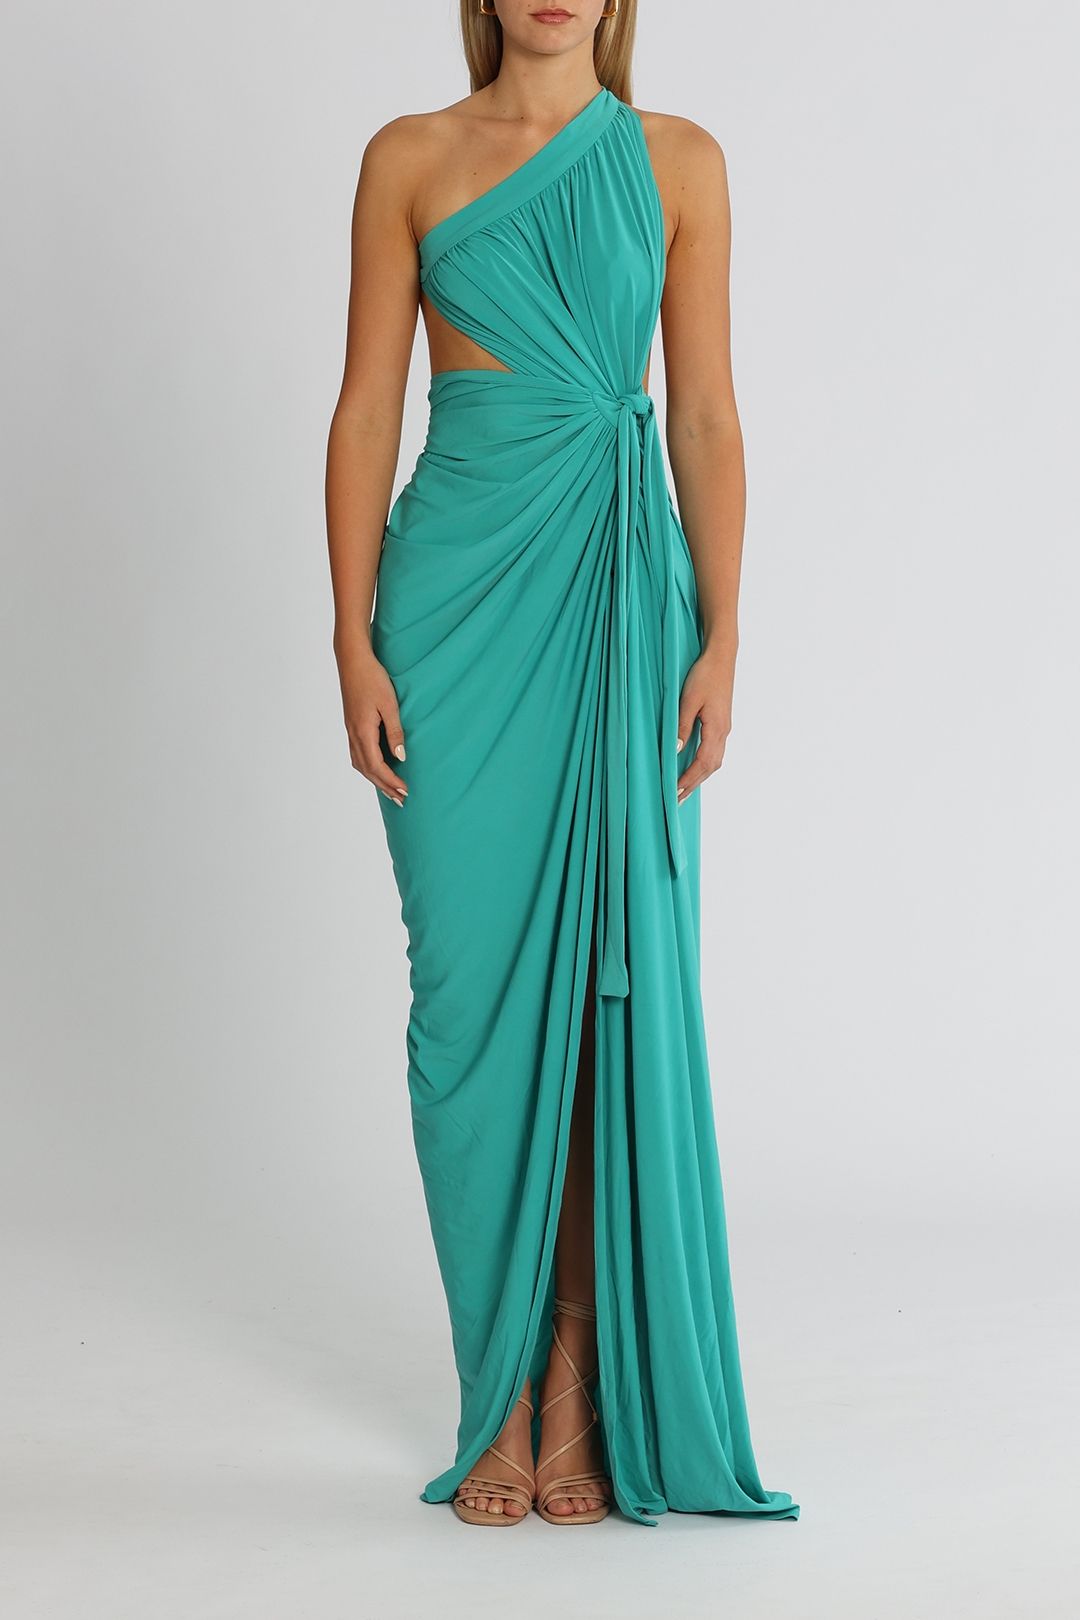 J. Angelique Disa Gown Teal